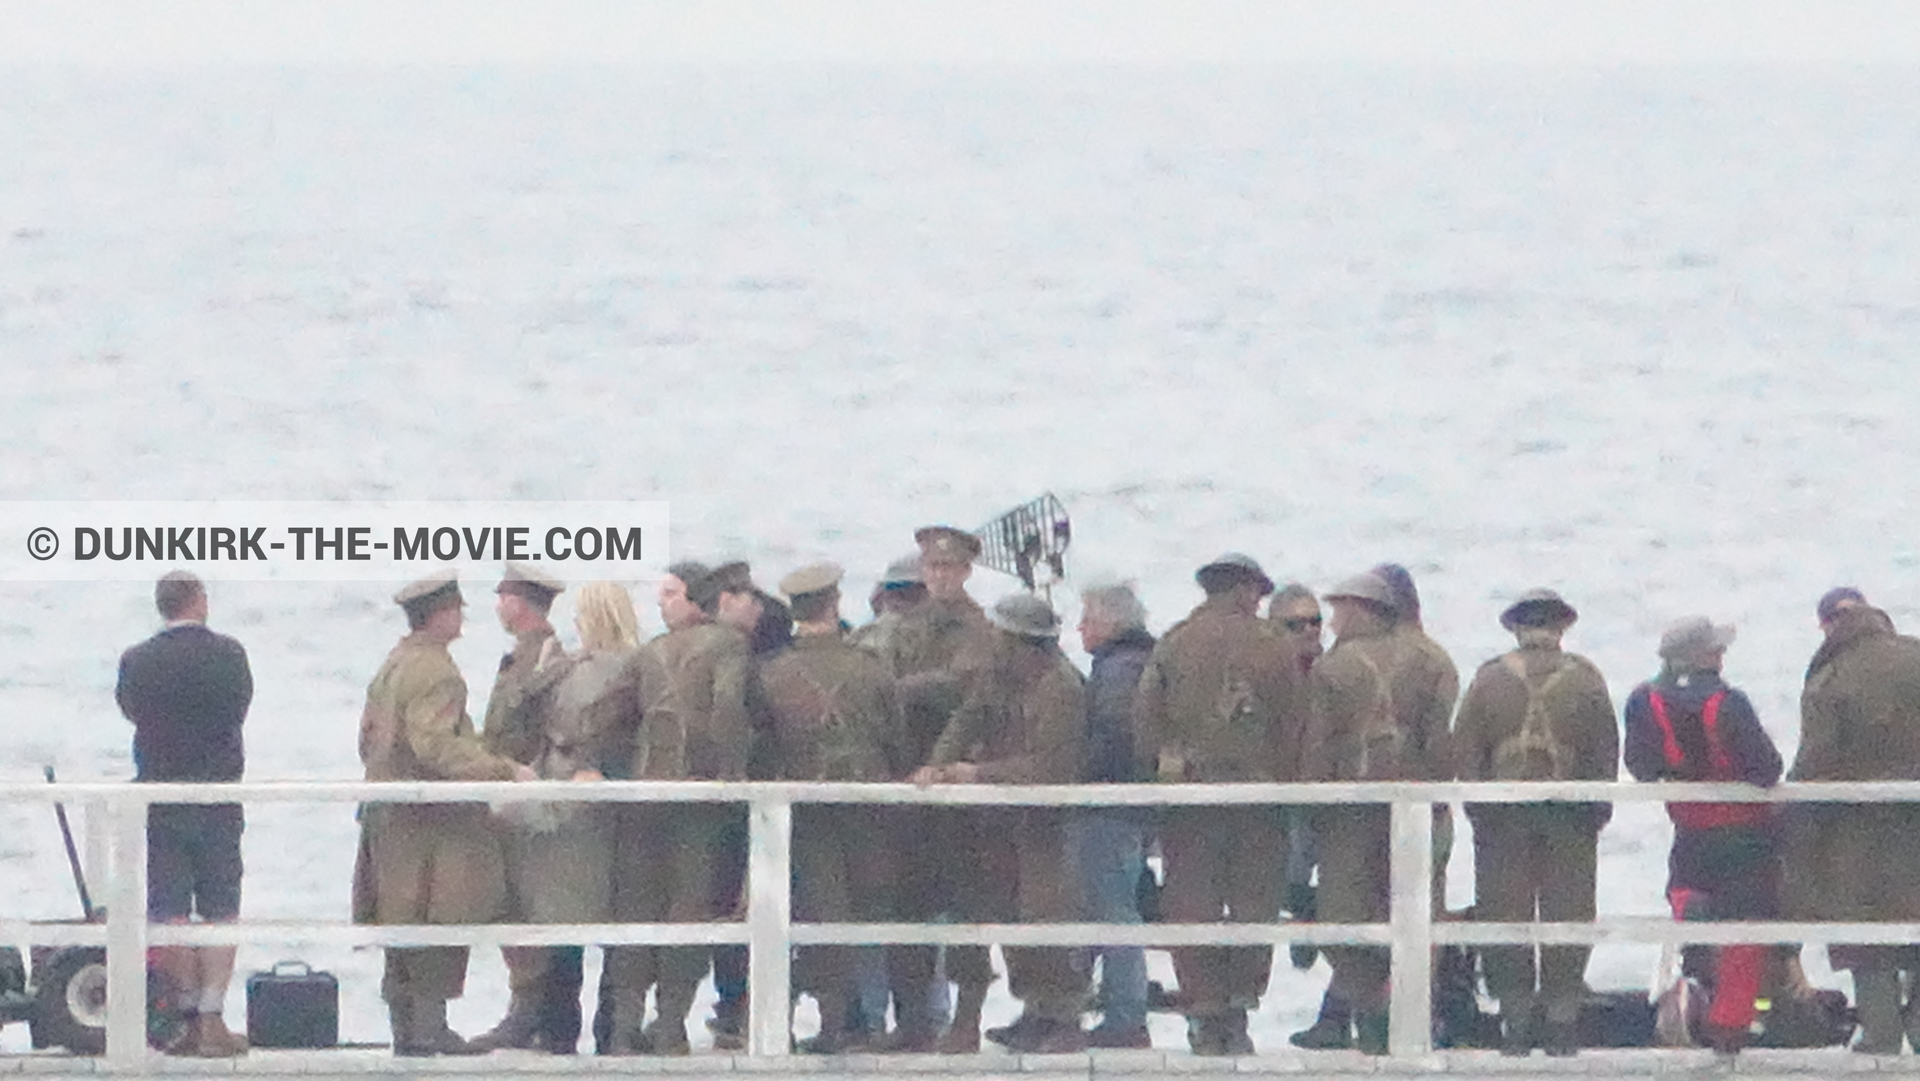 Picture with actor, supernumeraries, EST pier, technical team,  from behind the scene of the Dunkirk movie by Nolan